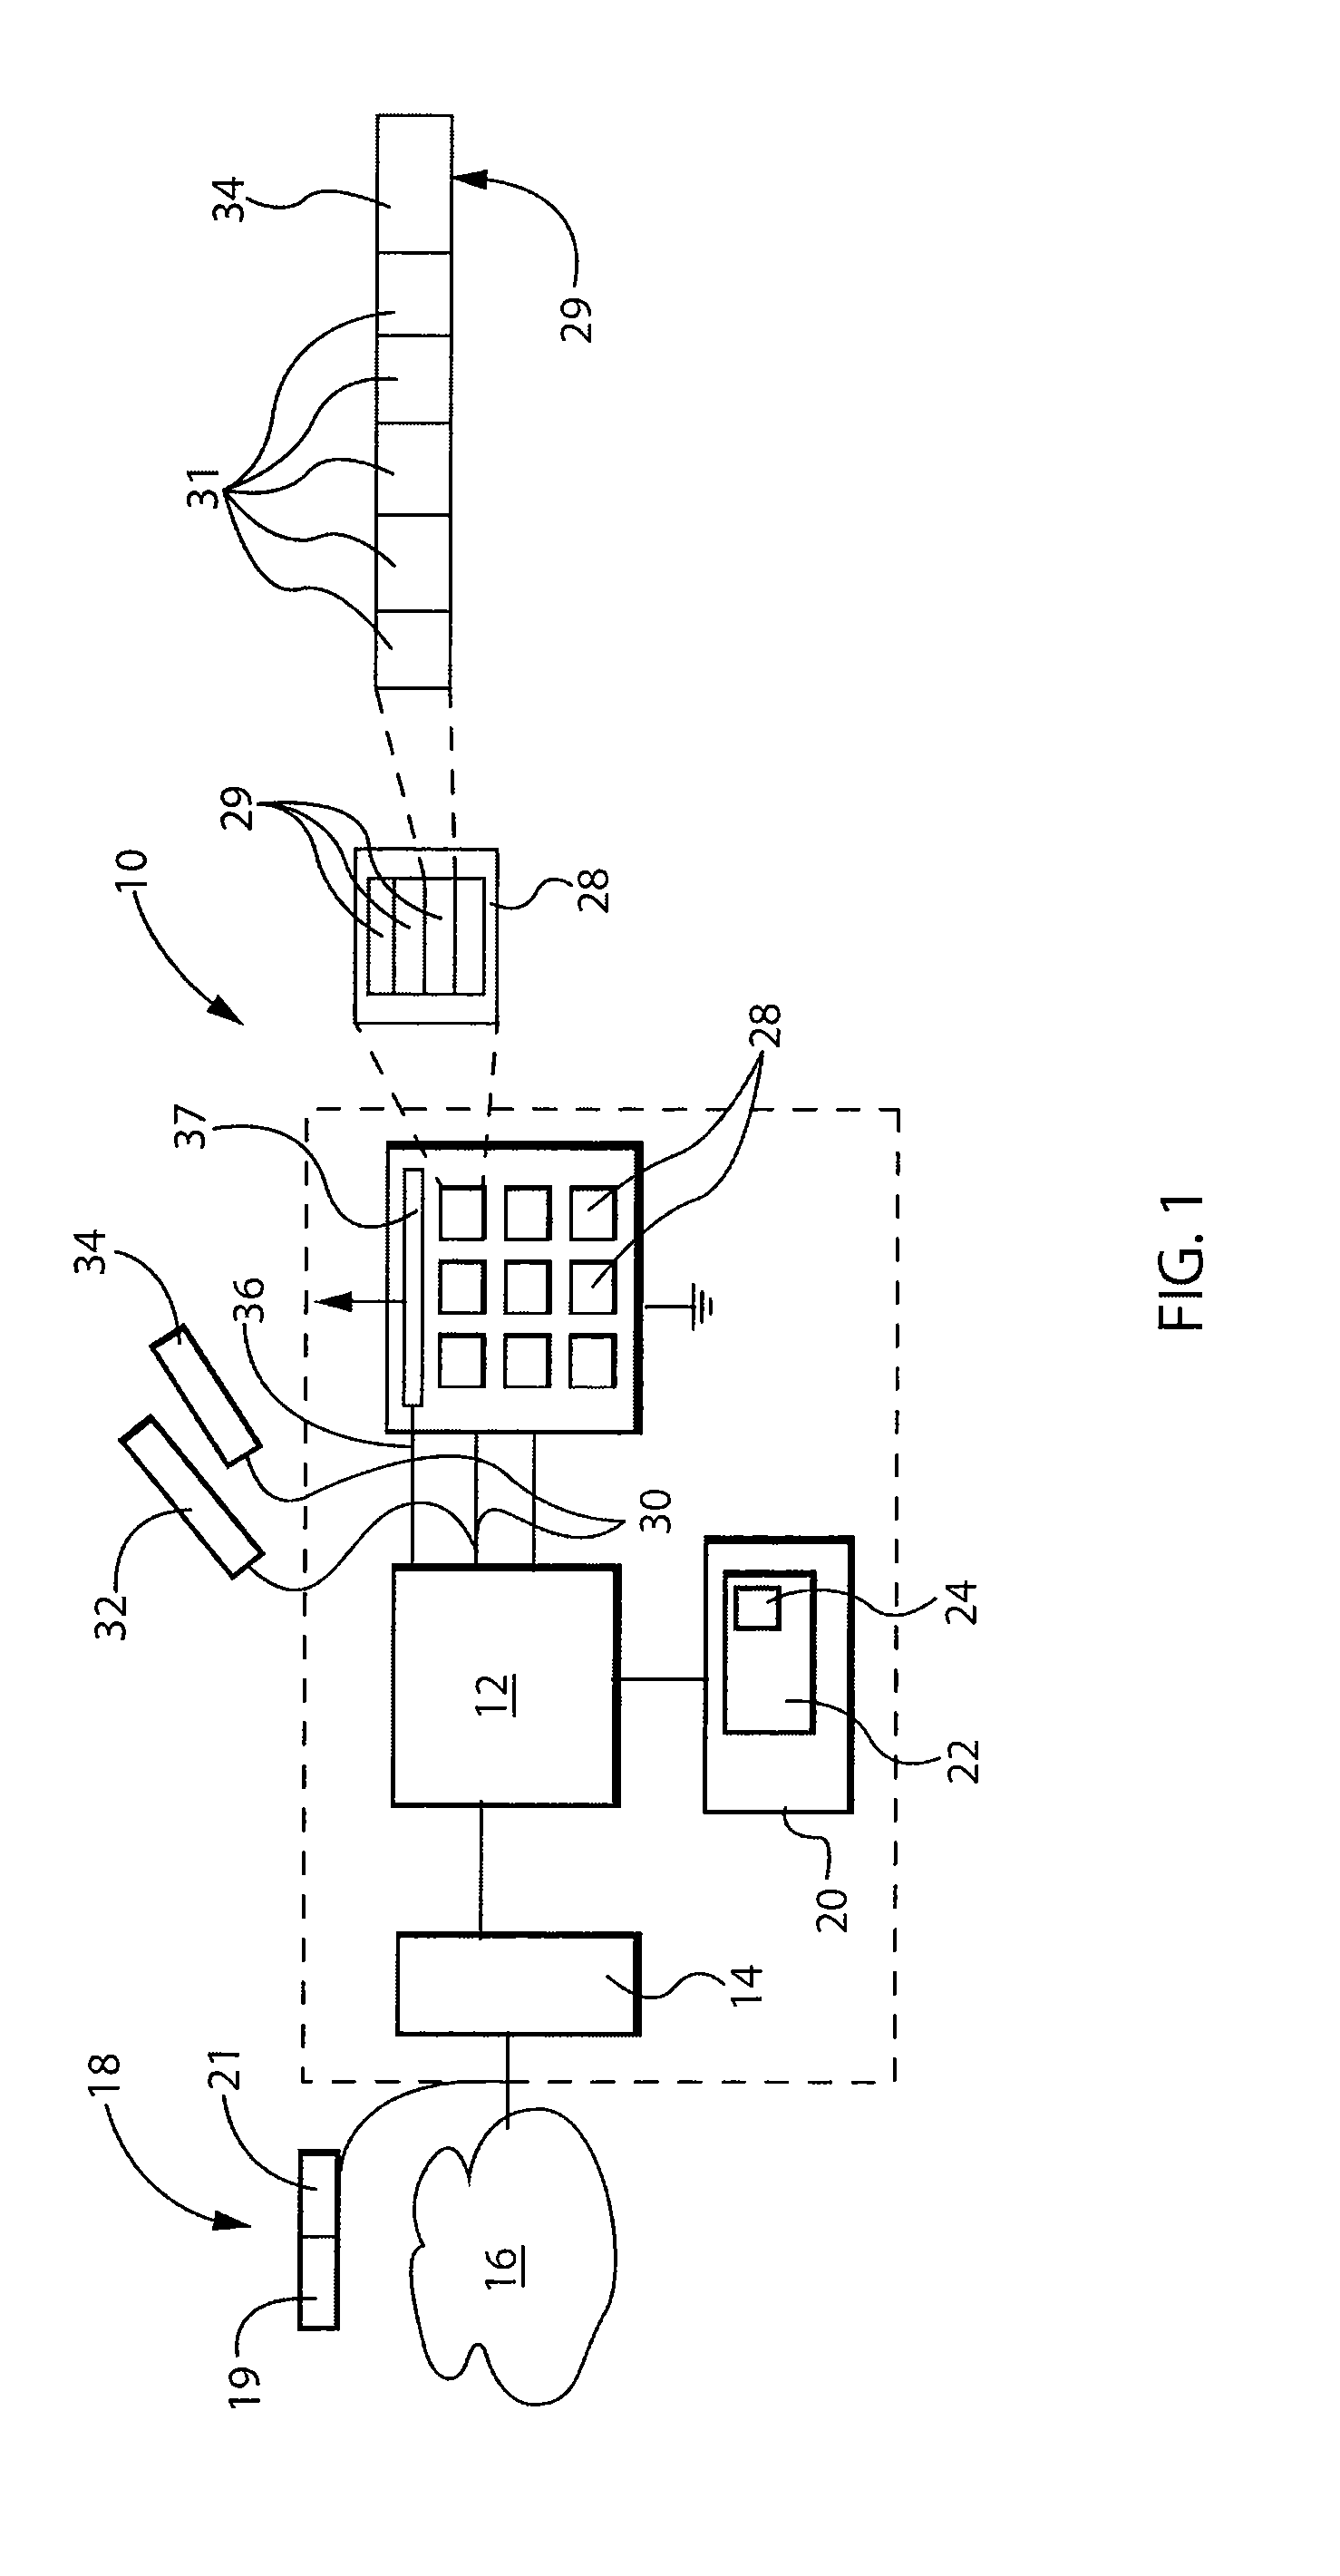 Content Addressable Memory with Reduced Power Consumption